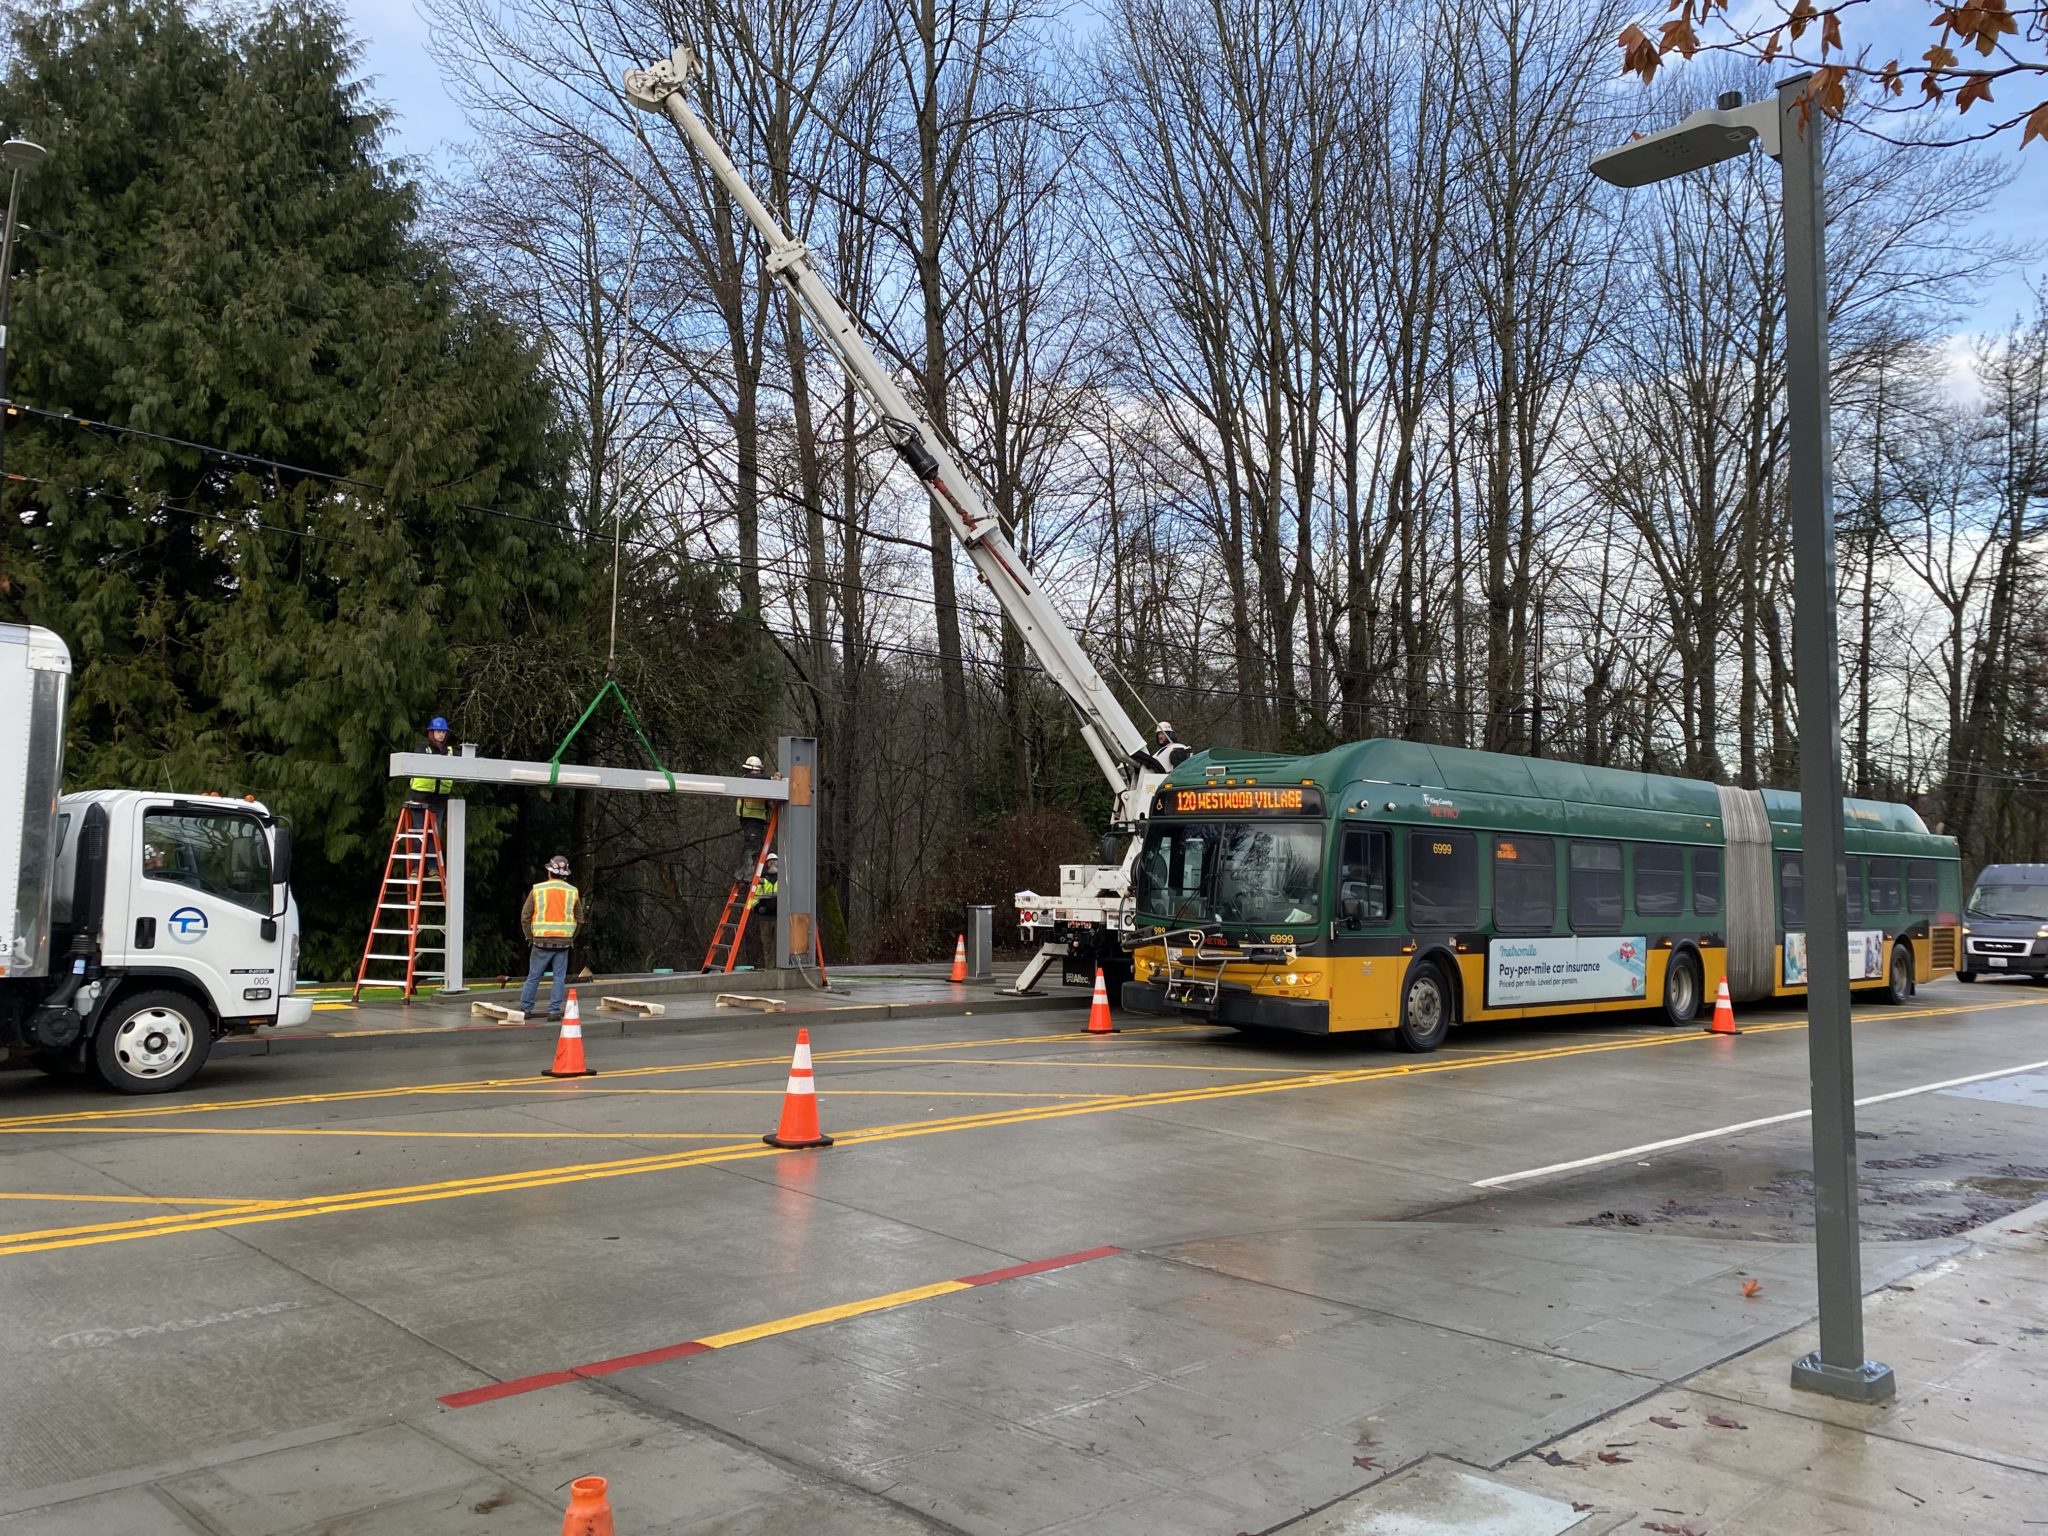 King County Metro installs a new RapidRide bus station. In the photo, several people work to install the new bus station, as traffic moves through the area in a temporary configuration, including a bus and a delivery van. Trees are visible in the background.